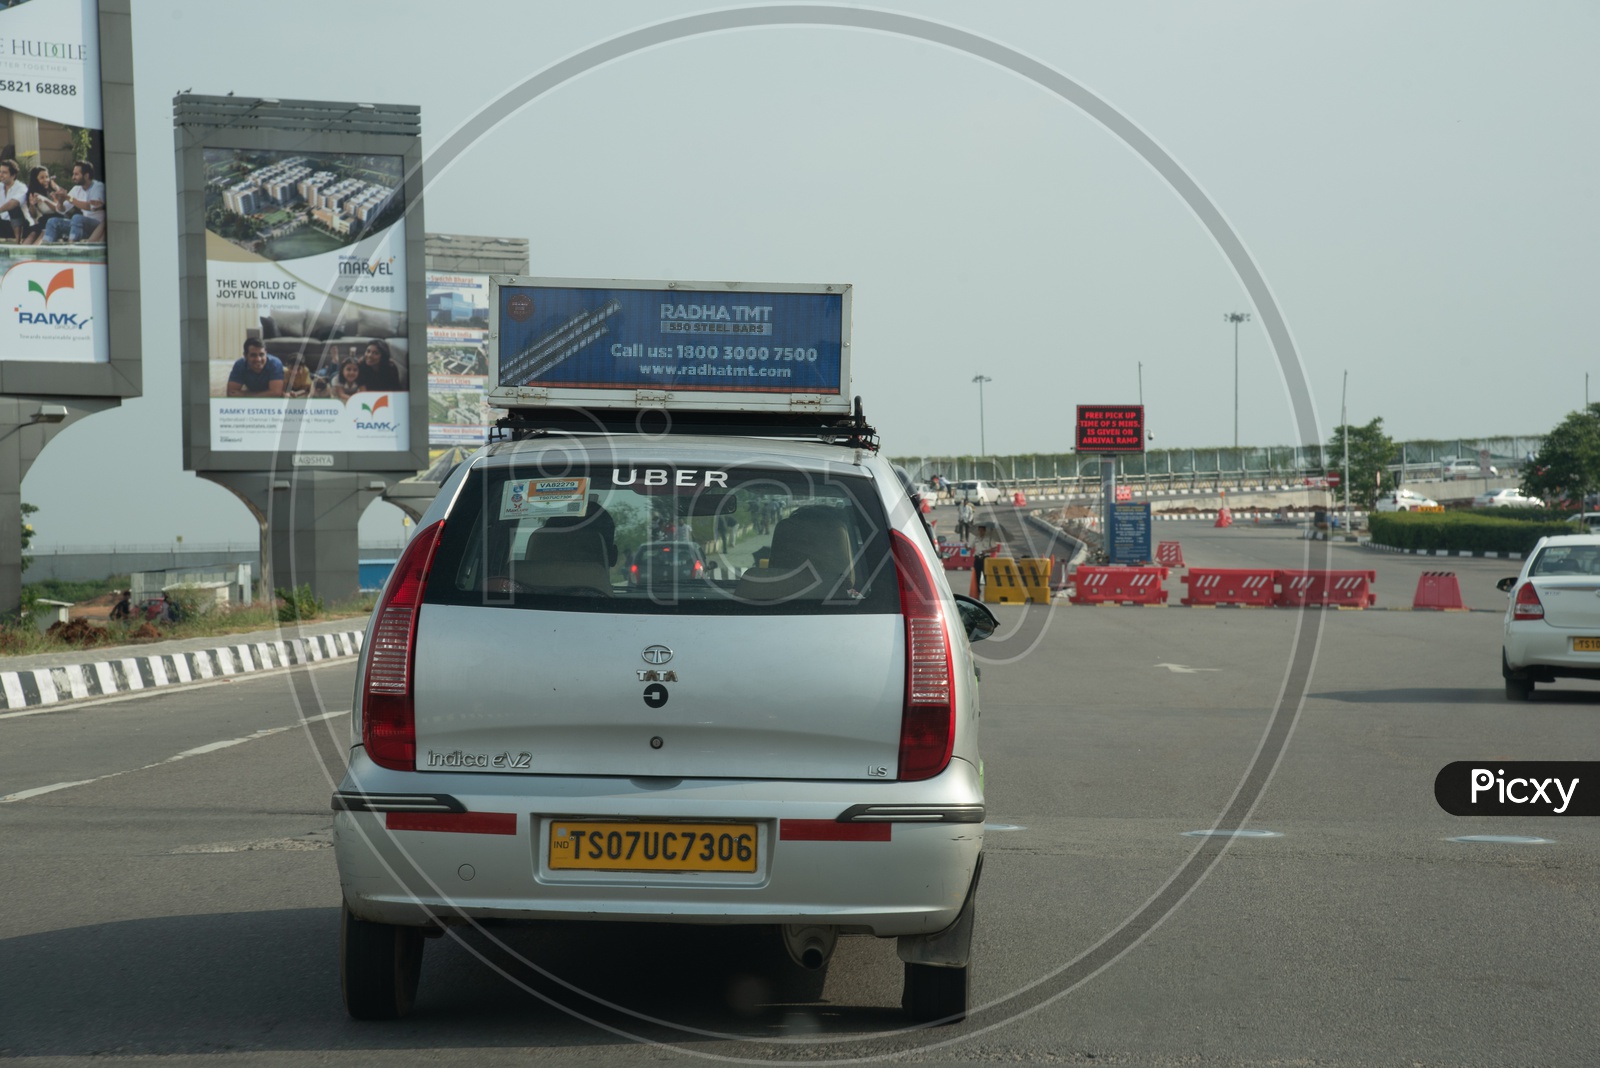 Advertisement Boards on Cabs